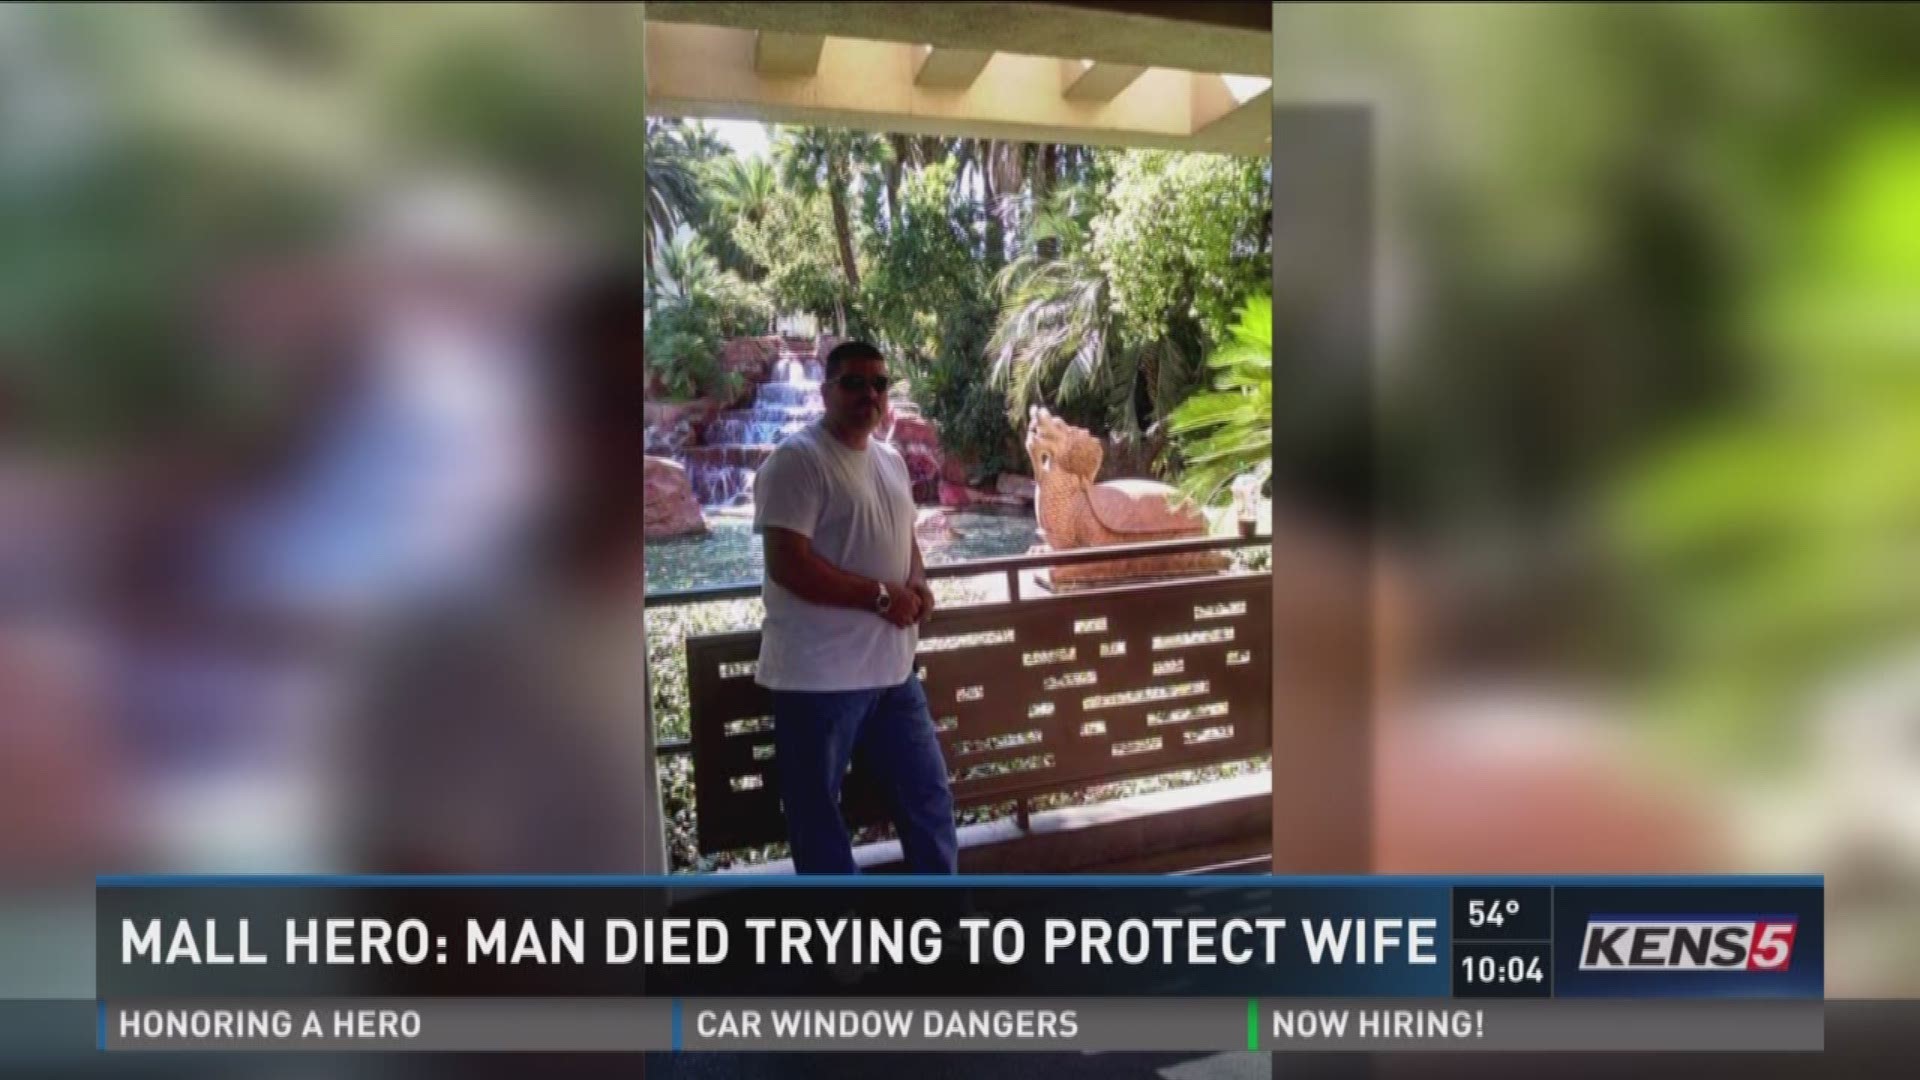 Mall hero: Man died trying to protect wife